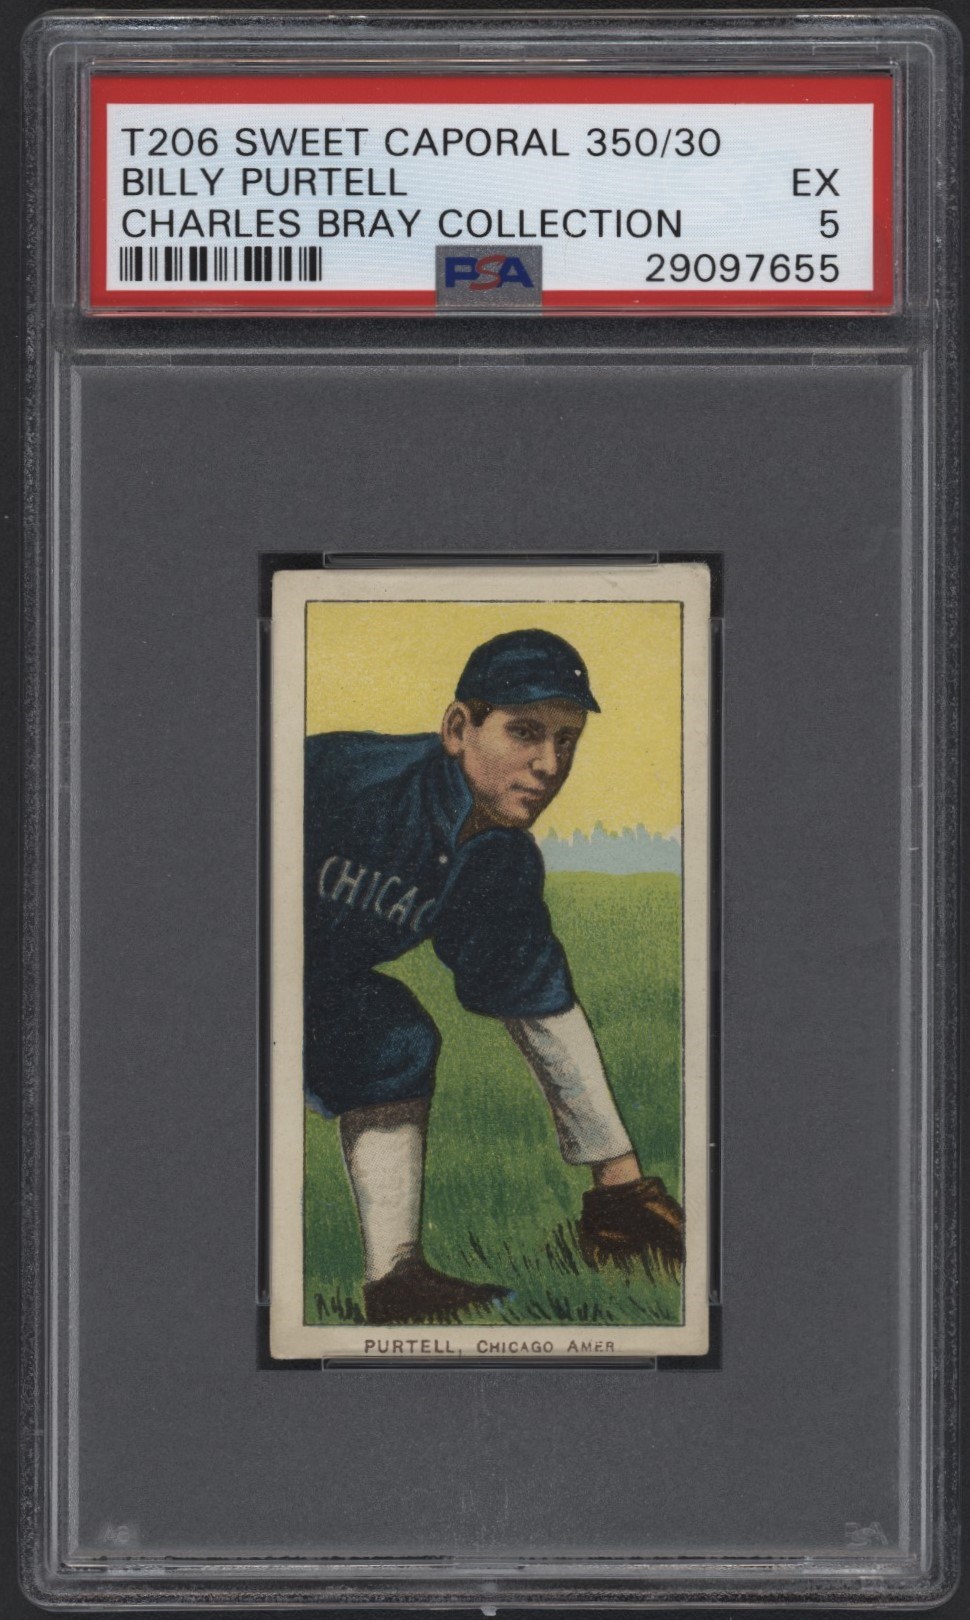 - T206 Sweet Caporal 350/30 Billy Purtell PSA EX 5 From the Charles Bray Collection